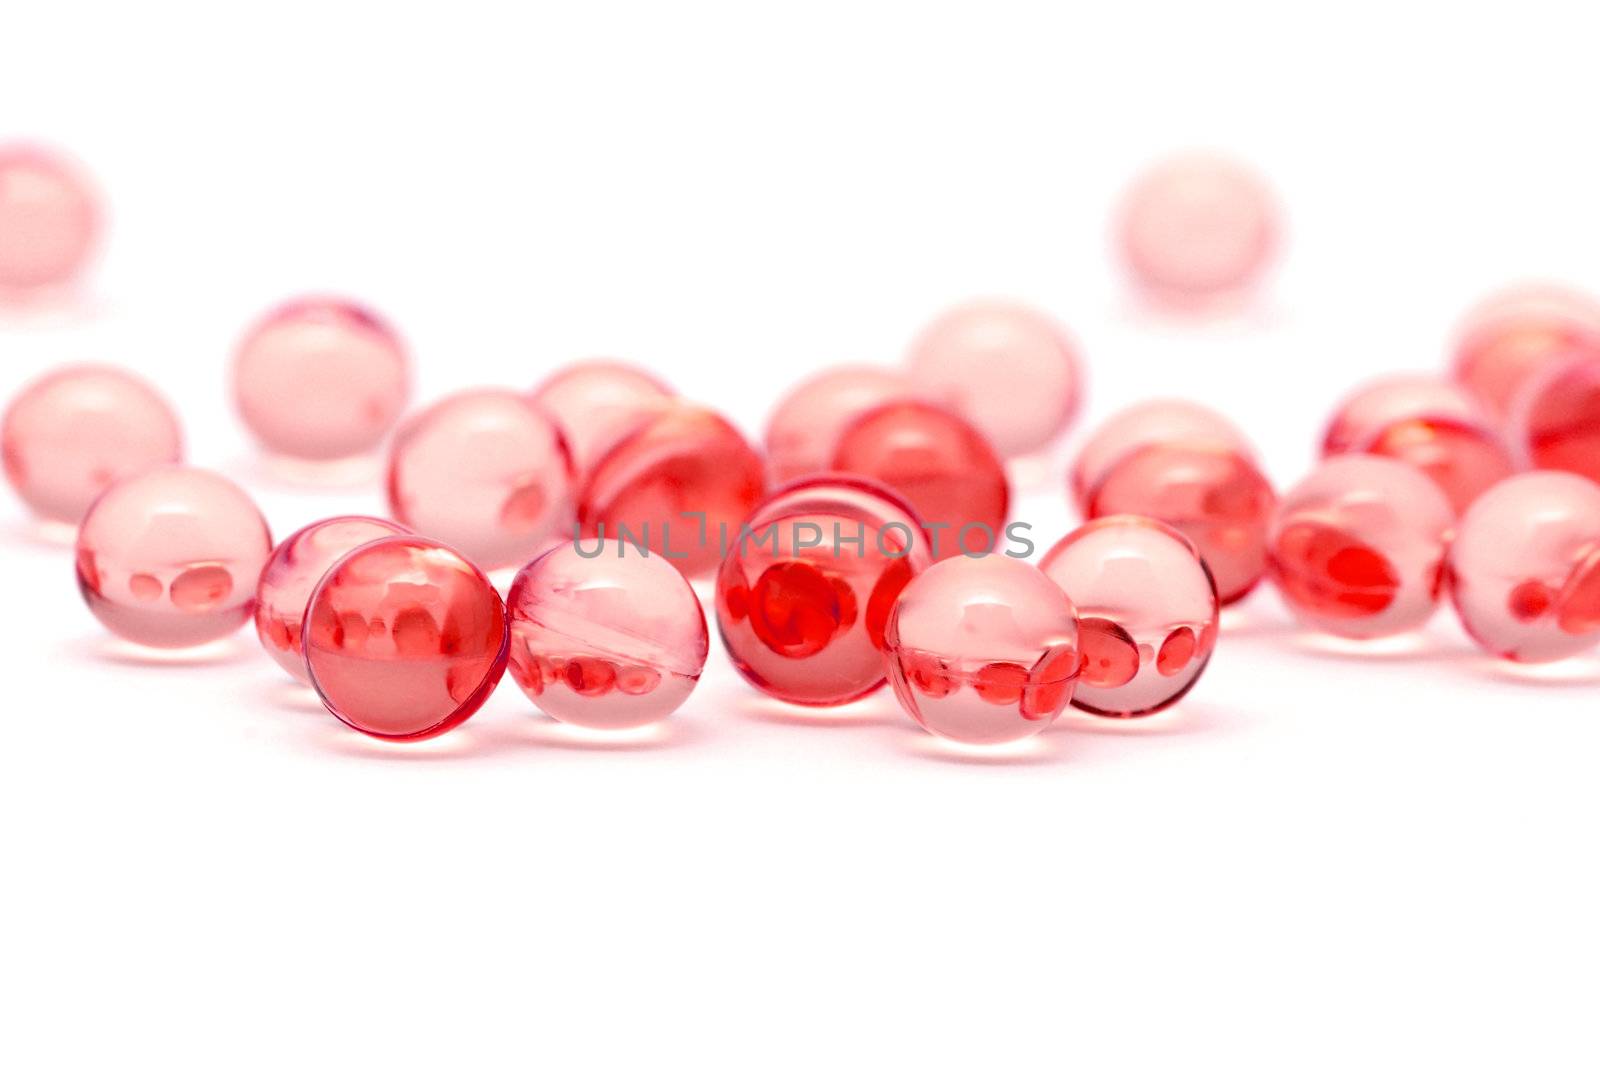 Transparent red capsules by Olinkau